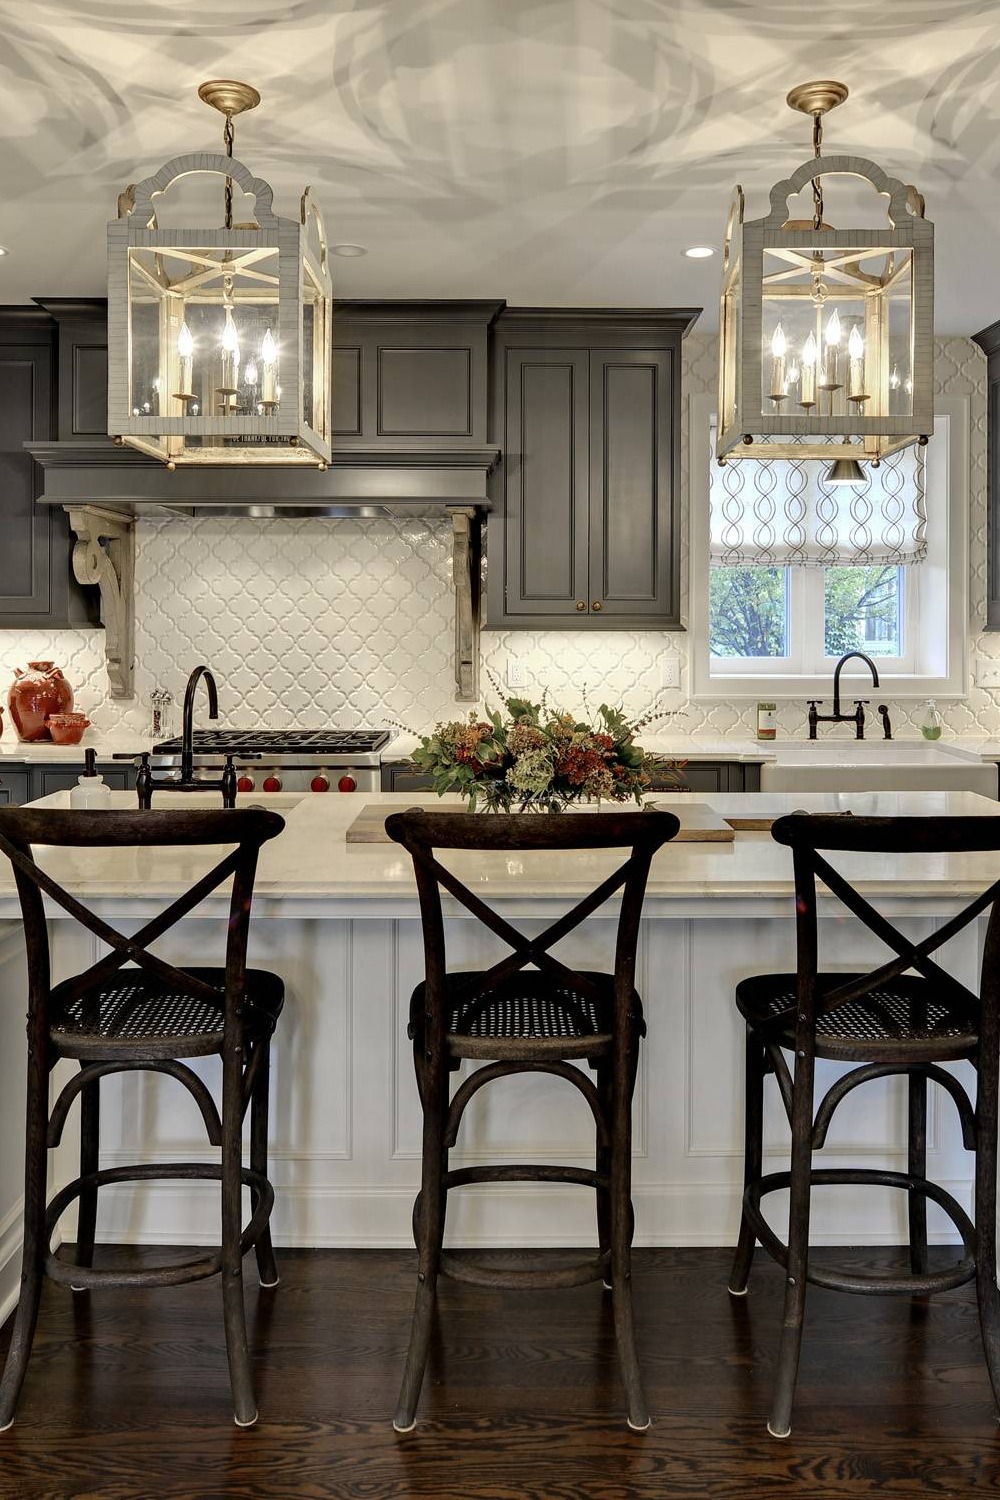 Gray Cabinets White Arabesque Tile Backsplash Pattern Traditional Island Glass Shaped Stone Style Classic Black Color Chairs